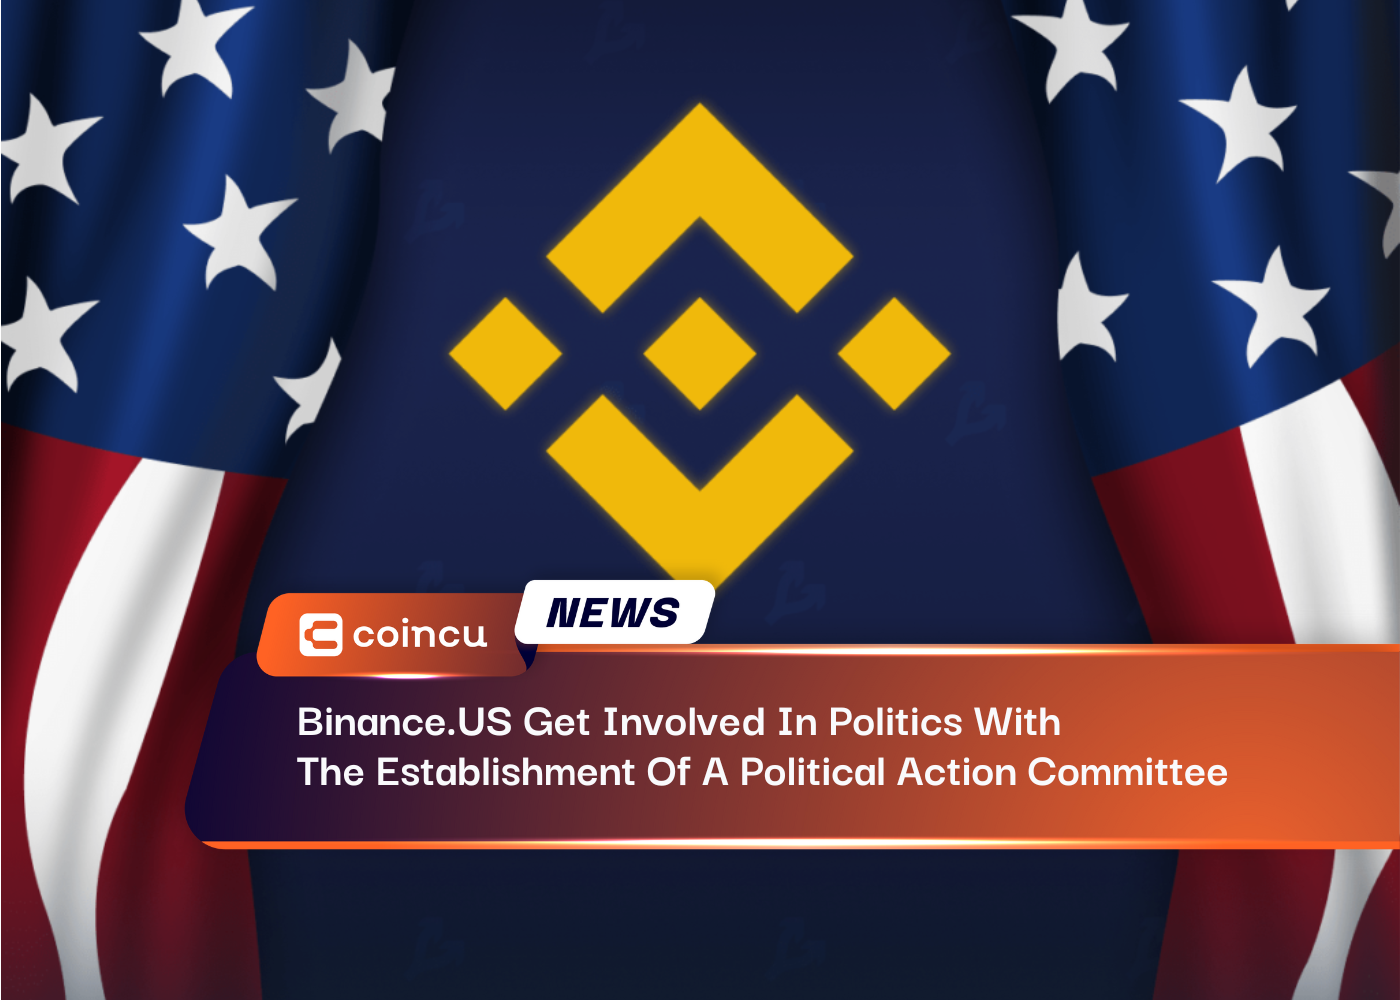 Binance.US Get Involved In Politics With The Establishment Of A Political Action Committee